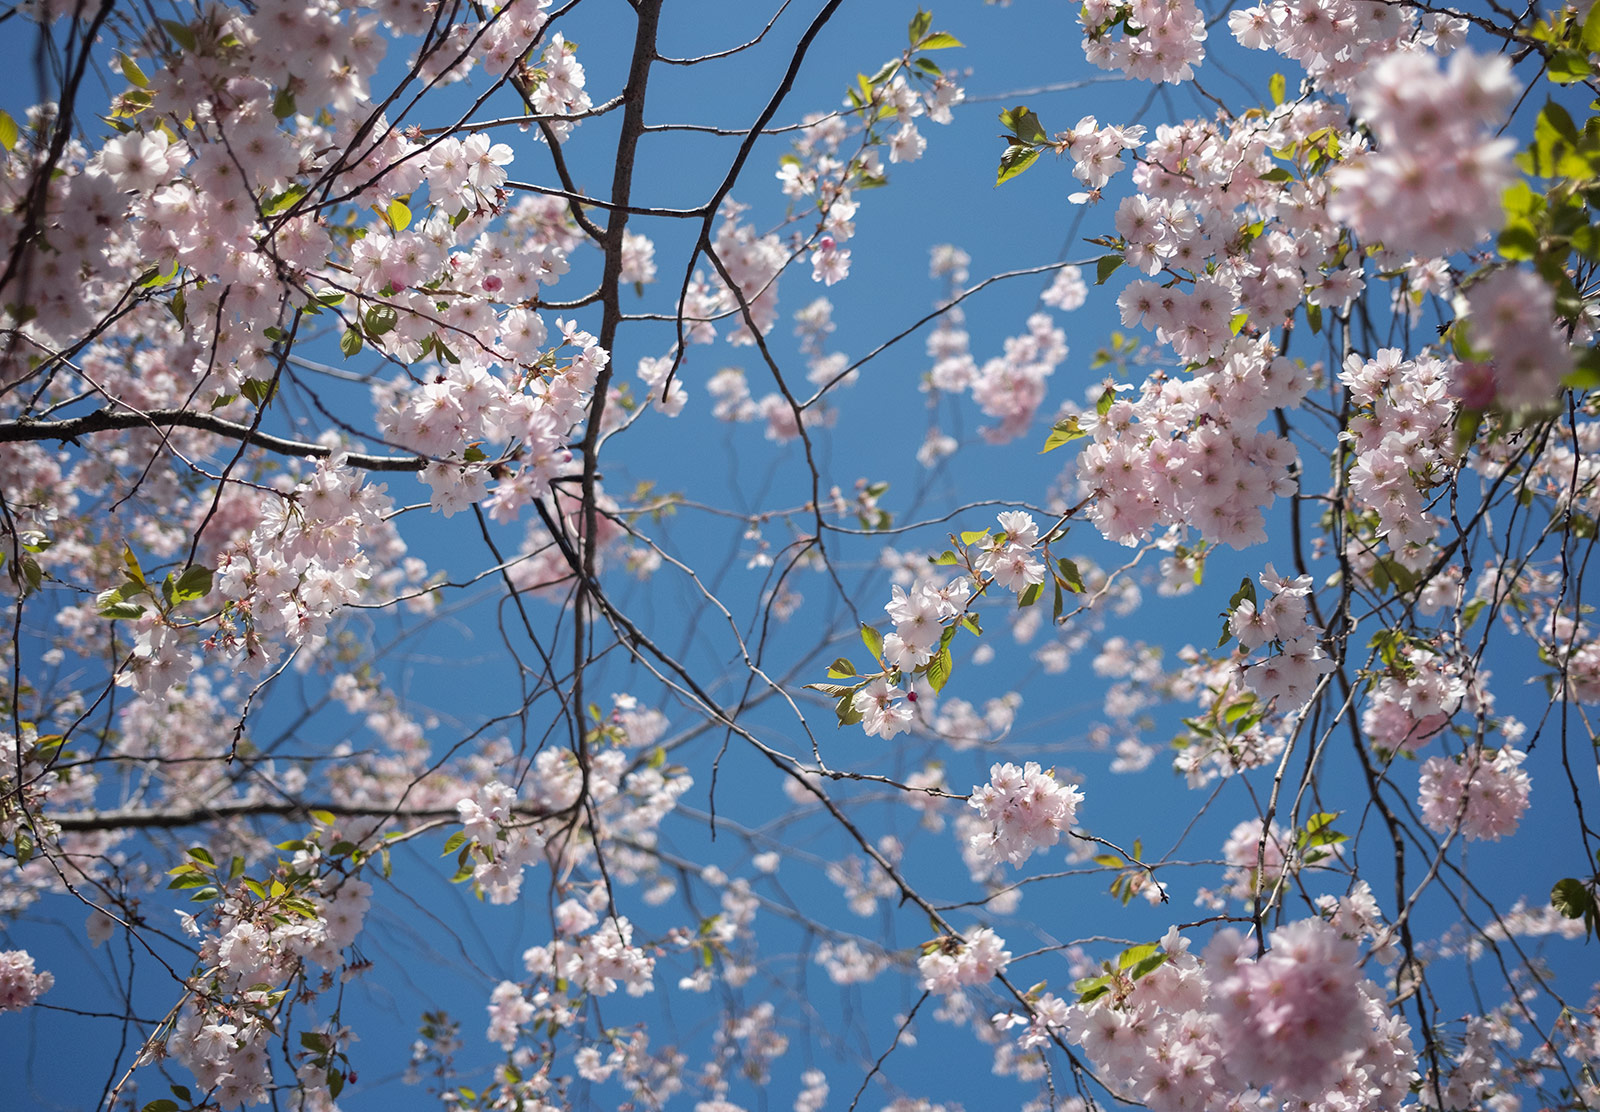 Looking up at cherry blossom branches